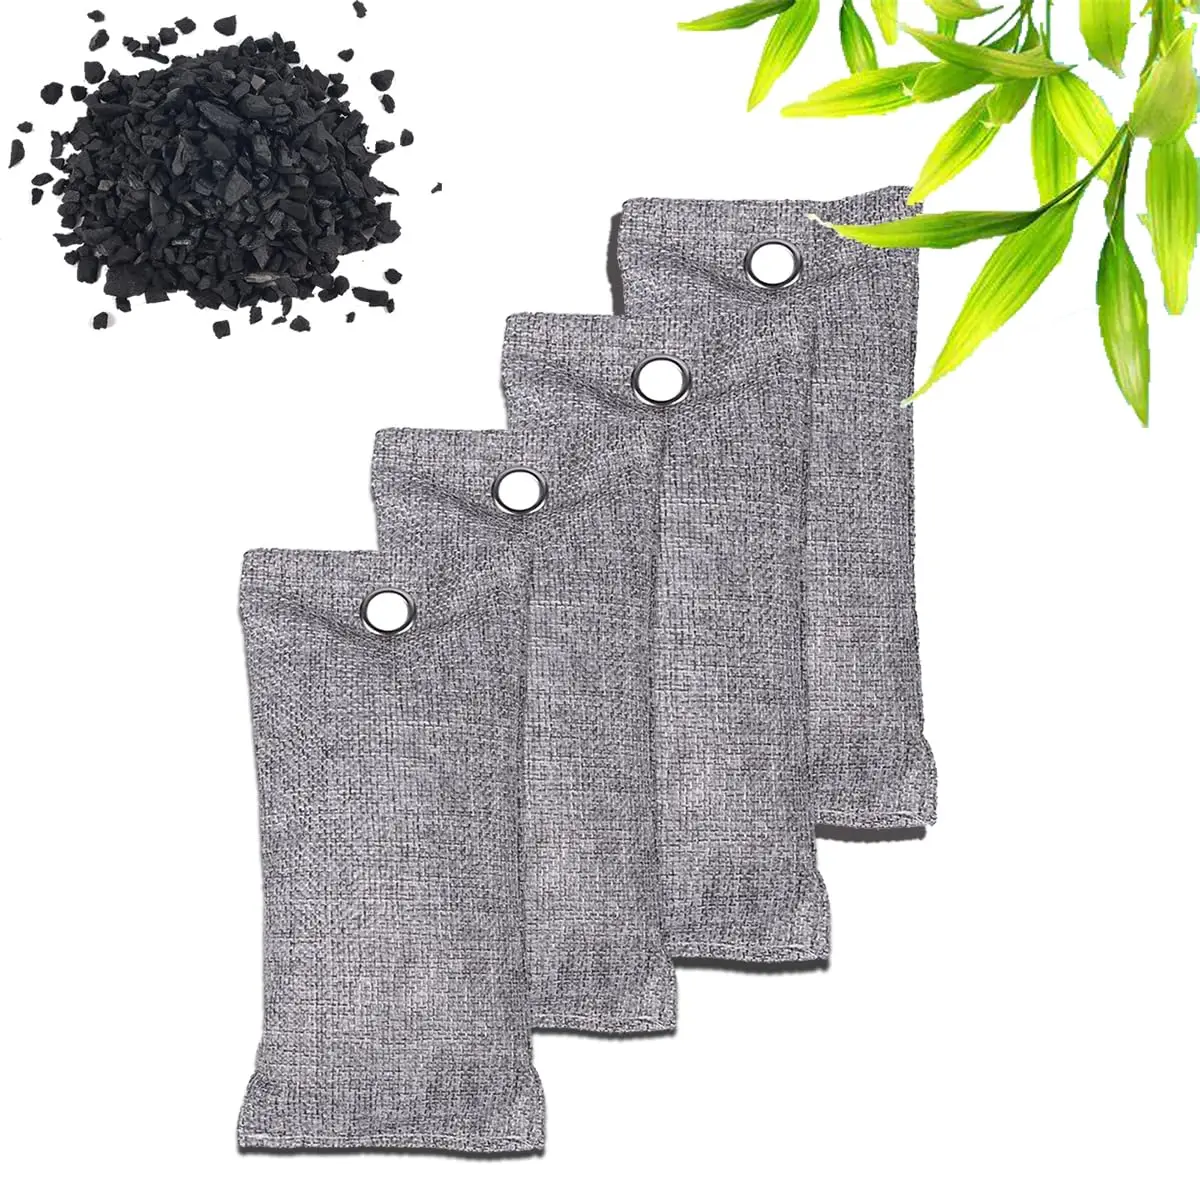 

Hot Sale 100g Shoe Freshener Shoe Activated Charcoal Bags Car Odor Absorber Bamboo Charcoal Air Purifying Bag